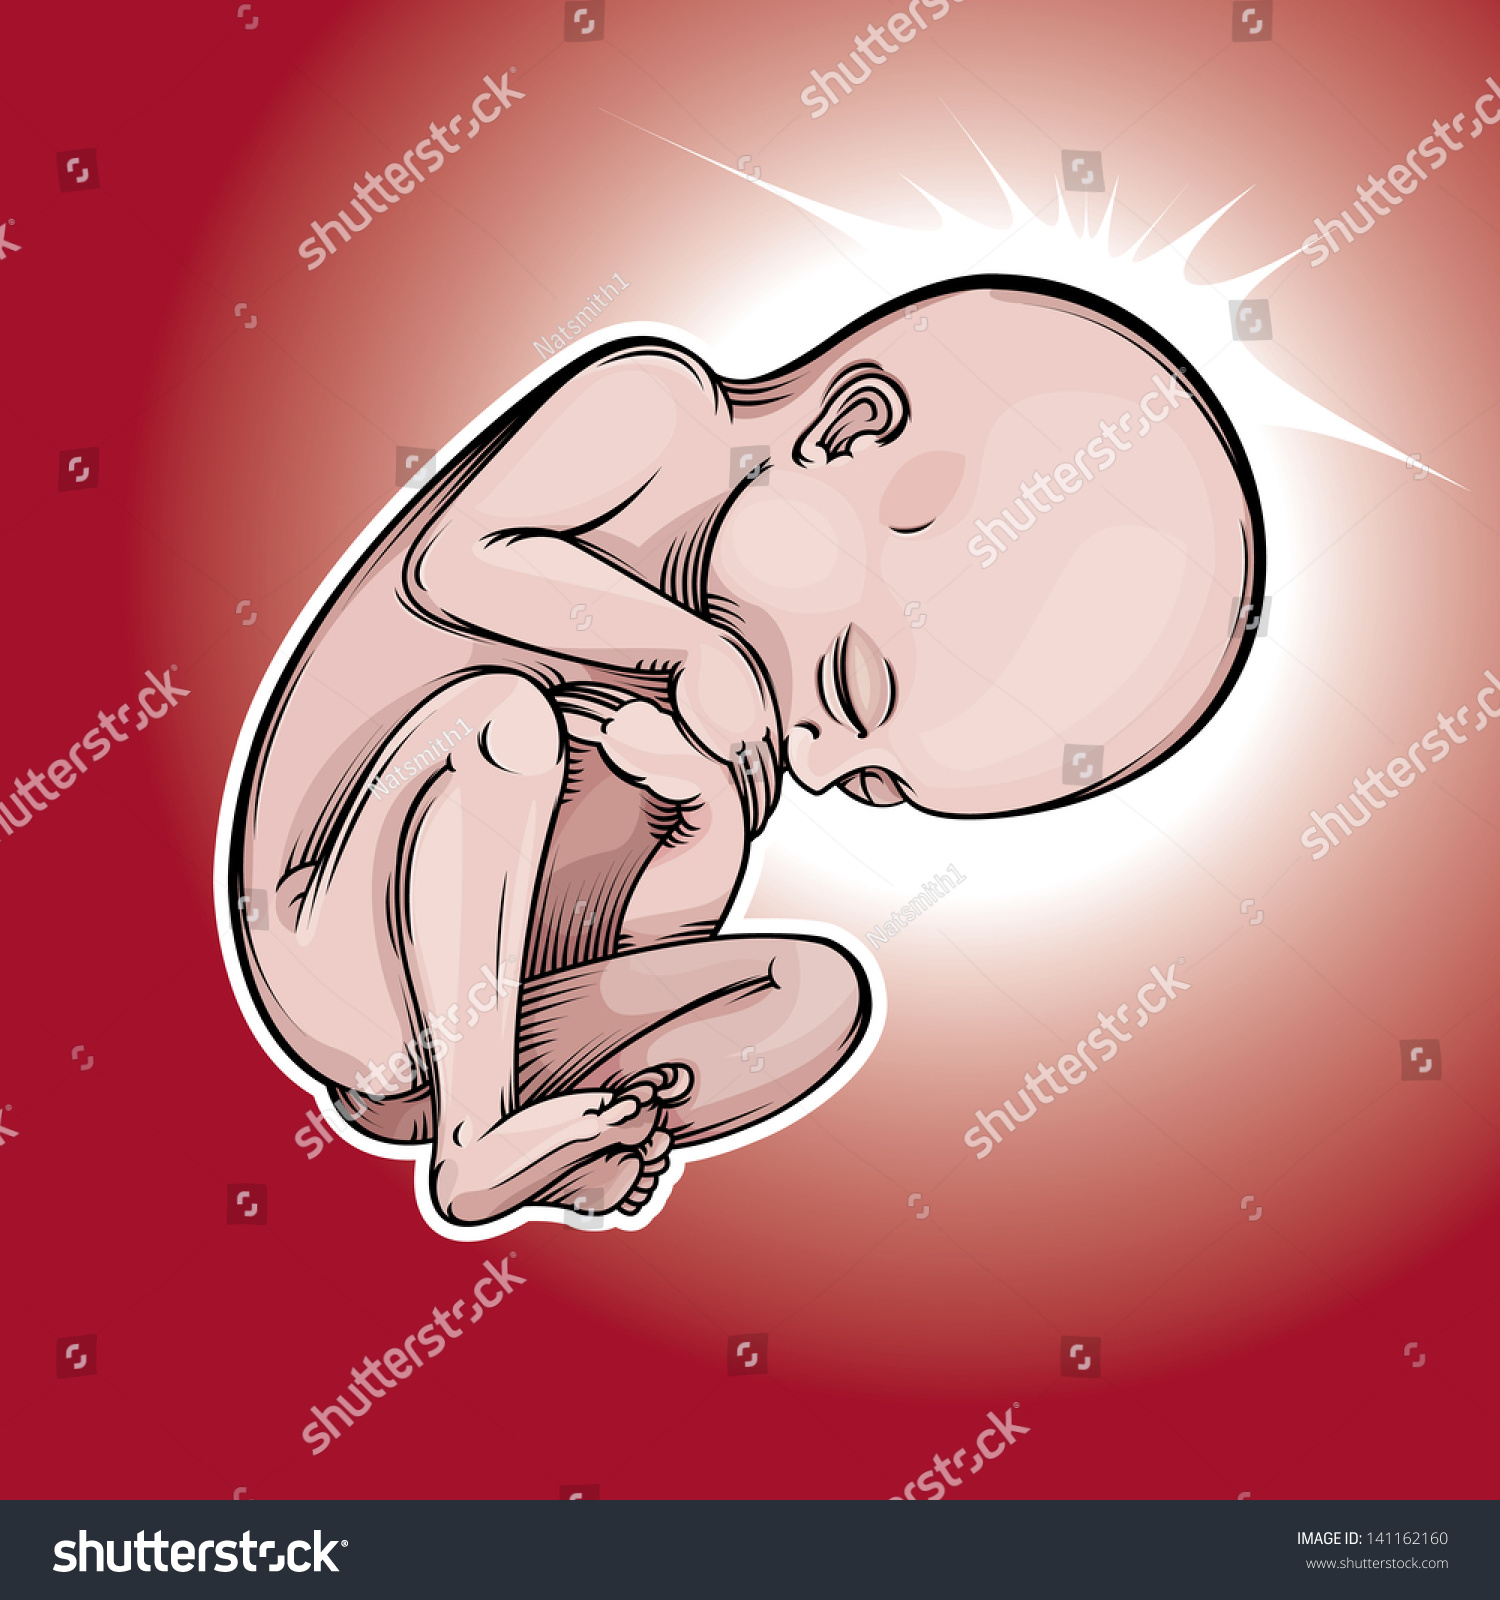 Vector Drawing Of A Baby Fetus/Fetus/ Easy To Edit Vetor ...